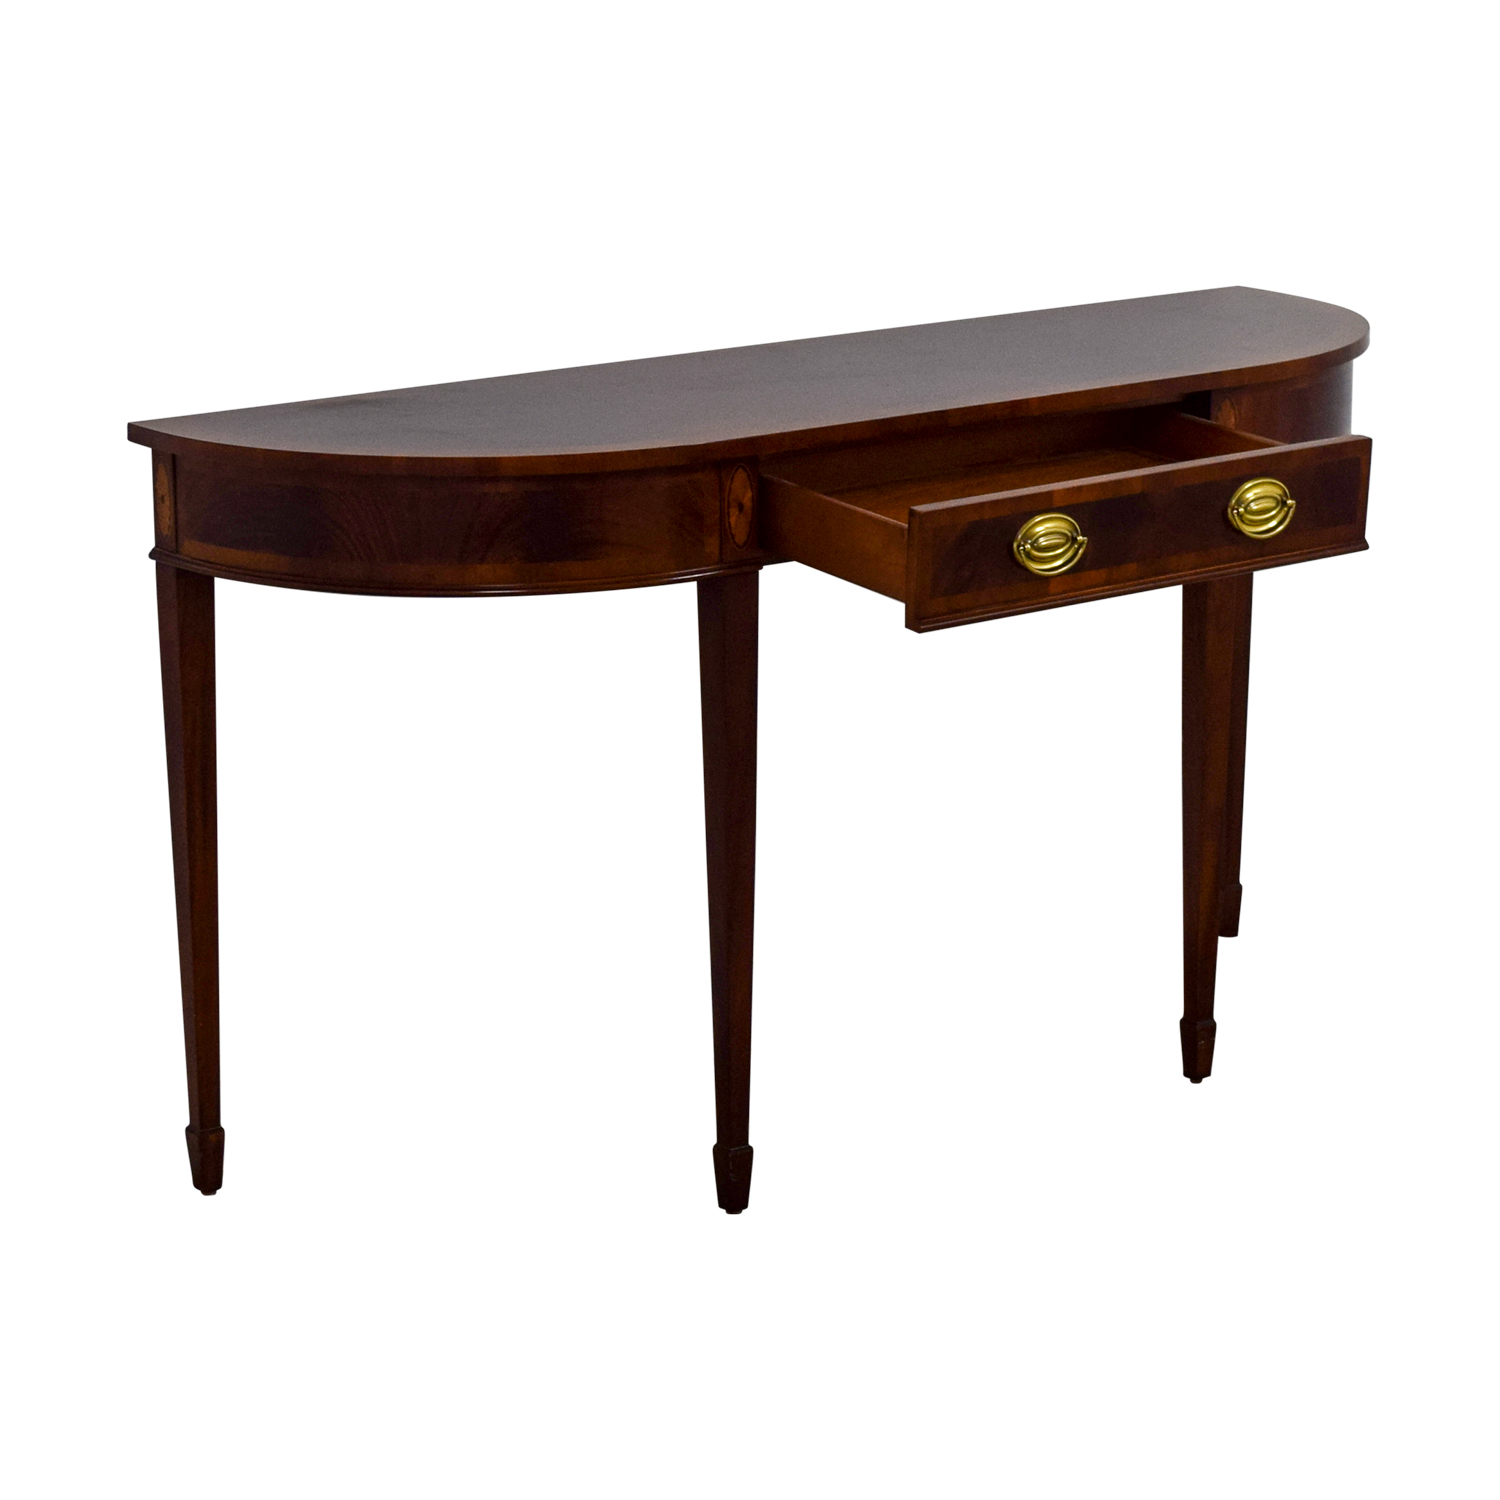 off cth sherrill occasional furniture sell reproduction cherry wood single drawer sofa table accent tables narrow console black dining set marble and chairs nightstand ethan allen